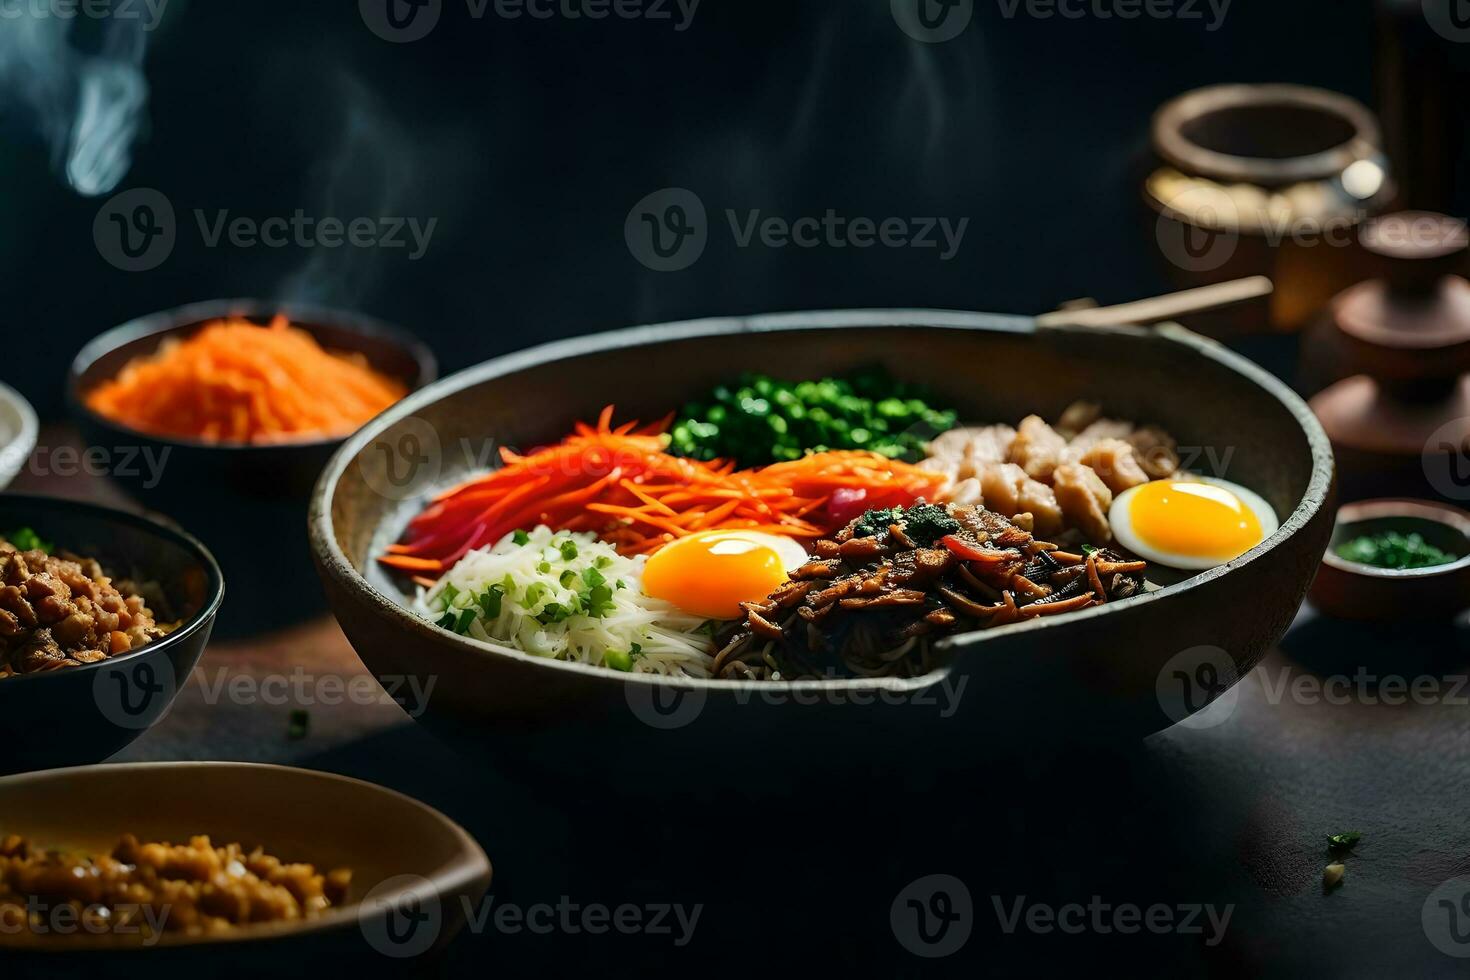 The camera is getting nearer to show a delicious and popular Korean dish named Bibimbap Sometimes, it can be difficult to understand what is going on or why something is happening AI Generated photo